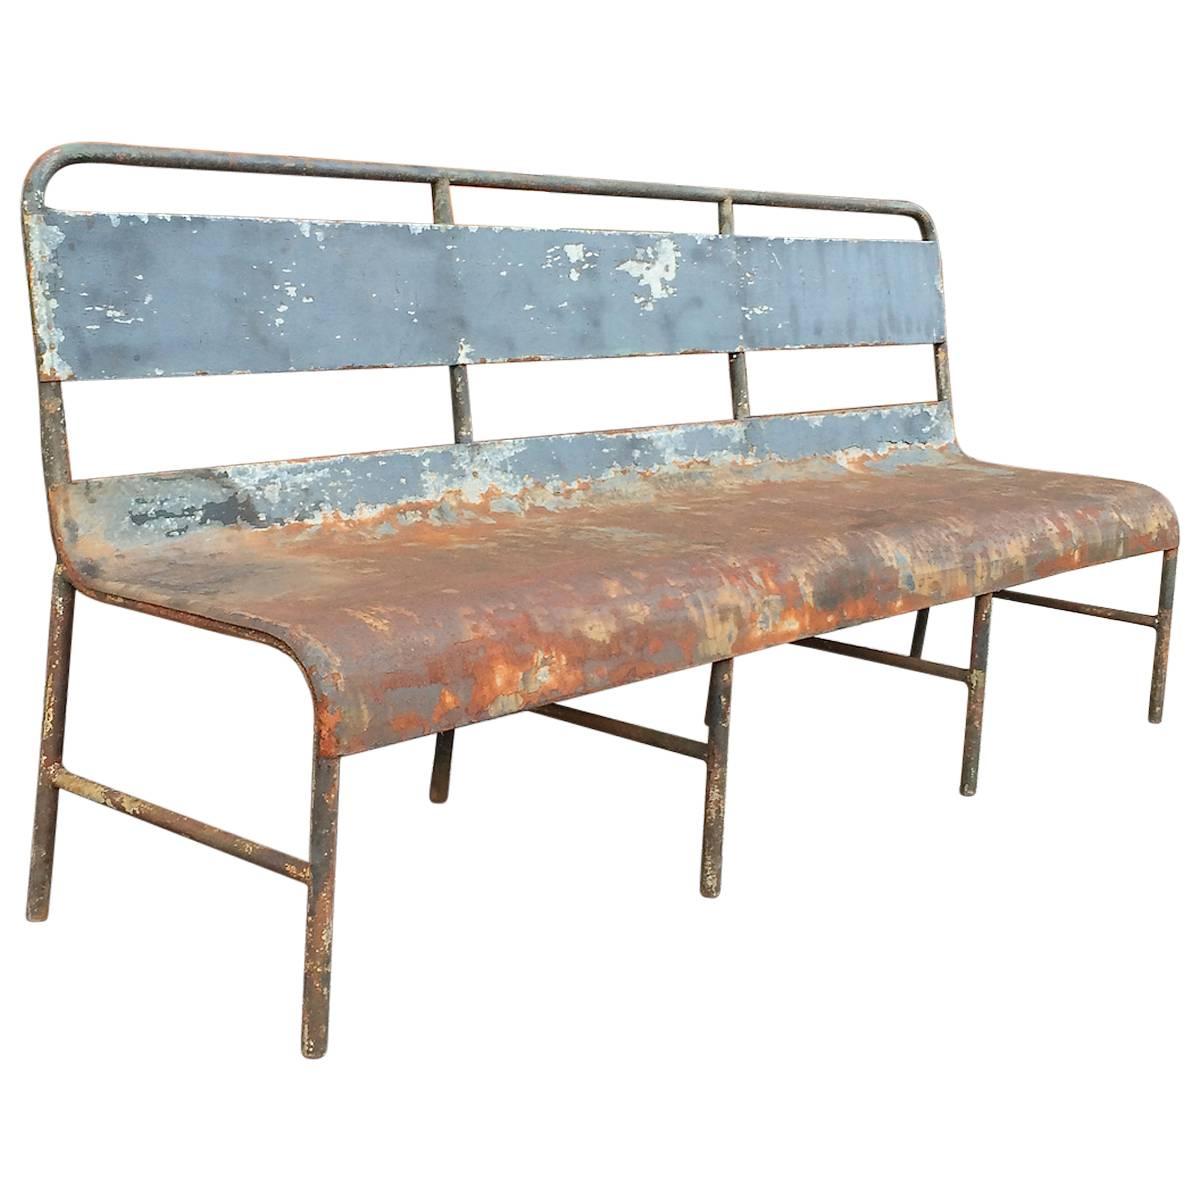 Industrial Painted Steel Navy Ship Bench